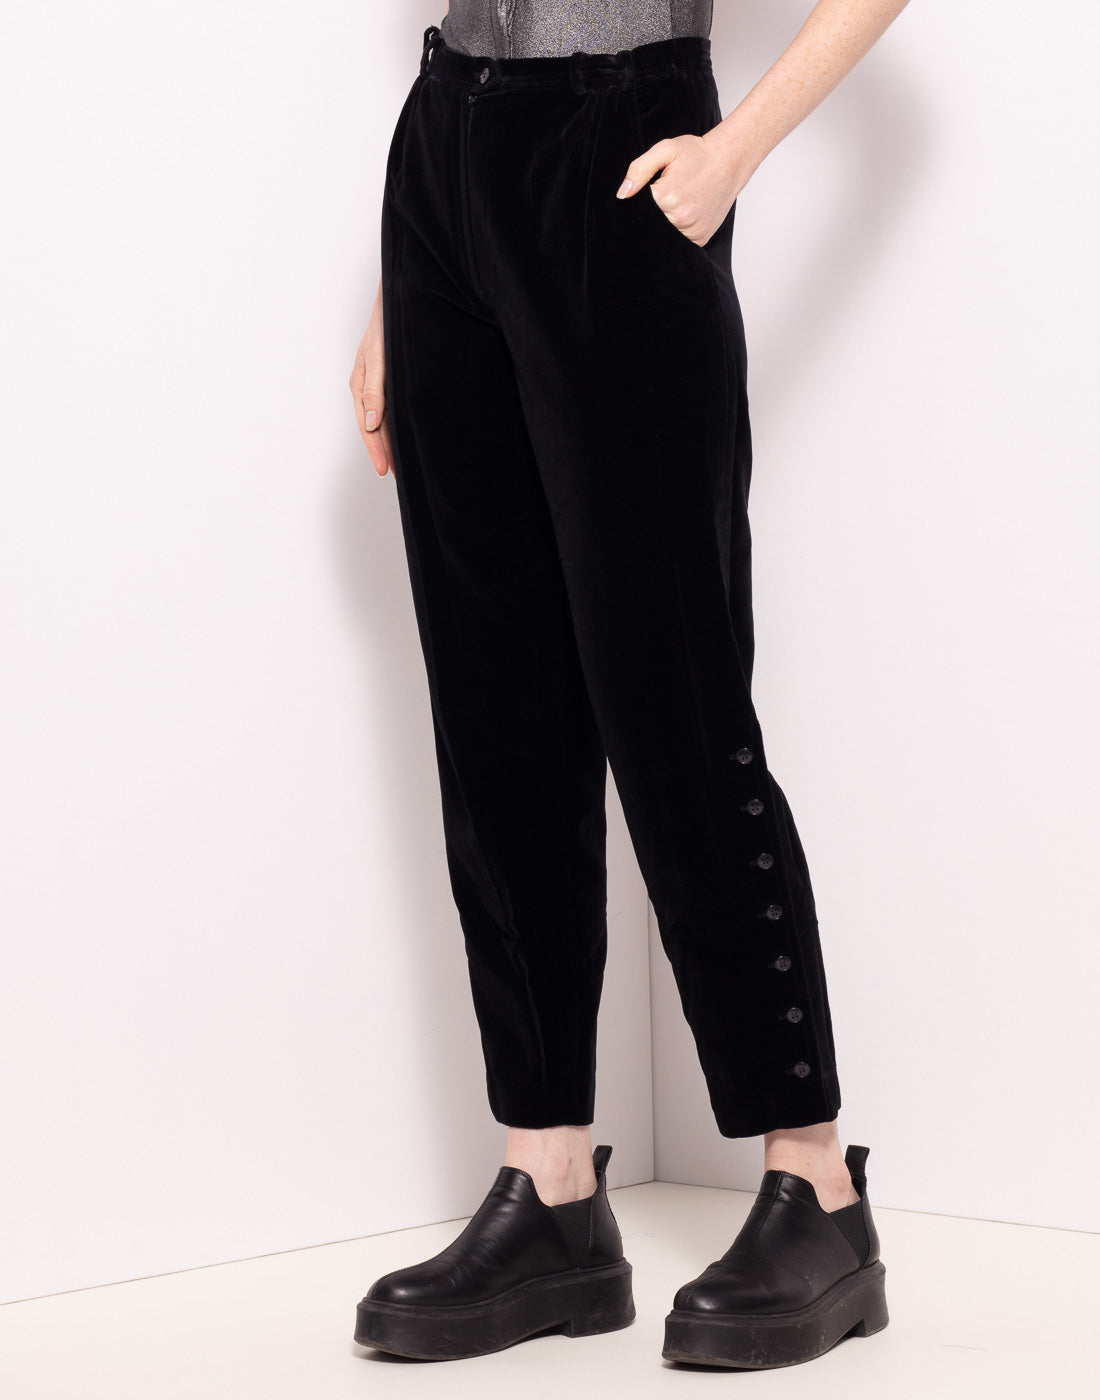 Vintage velvet trousers with leg buttons